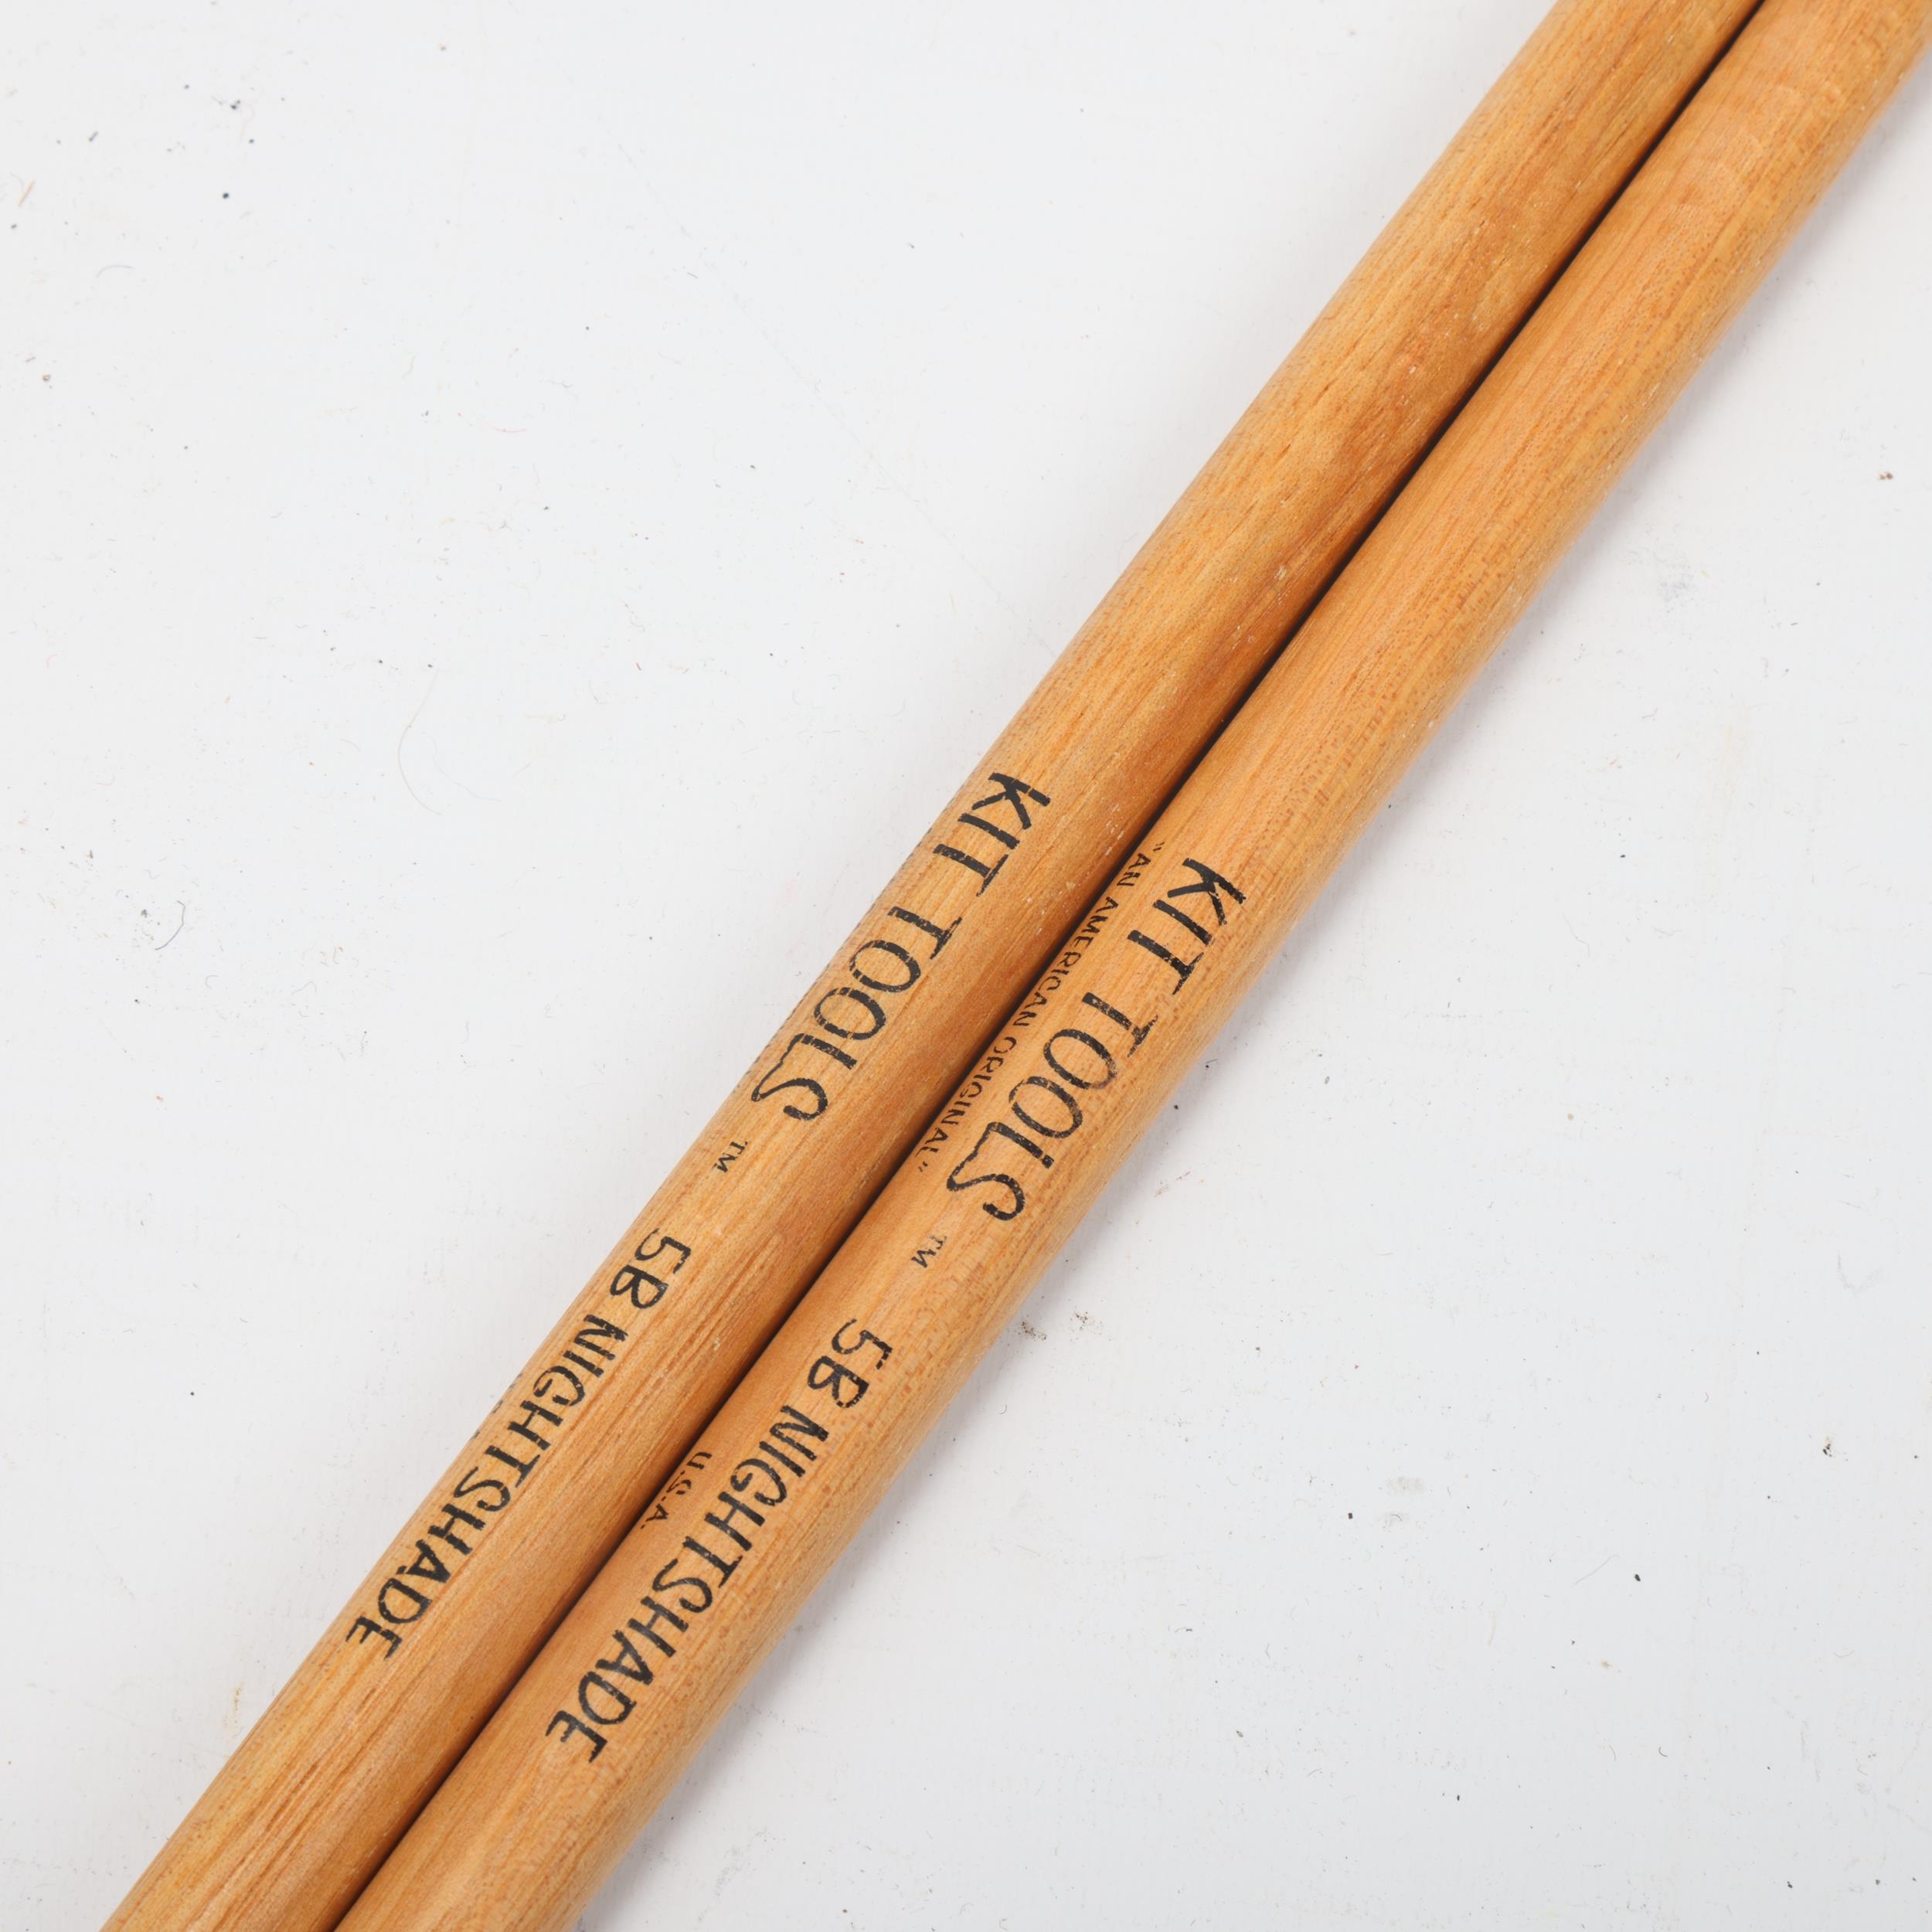 Two USED KIT TOOLS 'B NIGHTSHADE' Hickory DRUMSTICKS belonging to MITCH MITCHELL. - Image 2 of 3